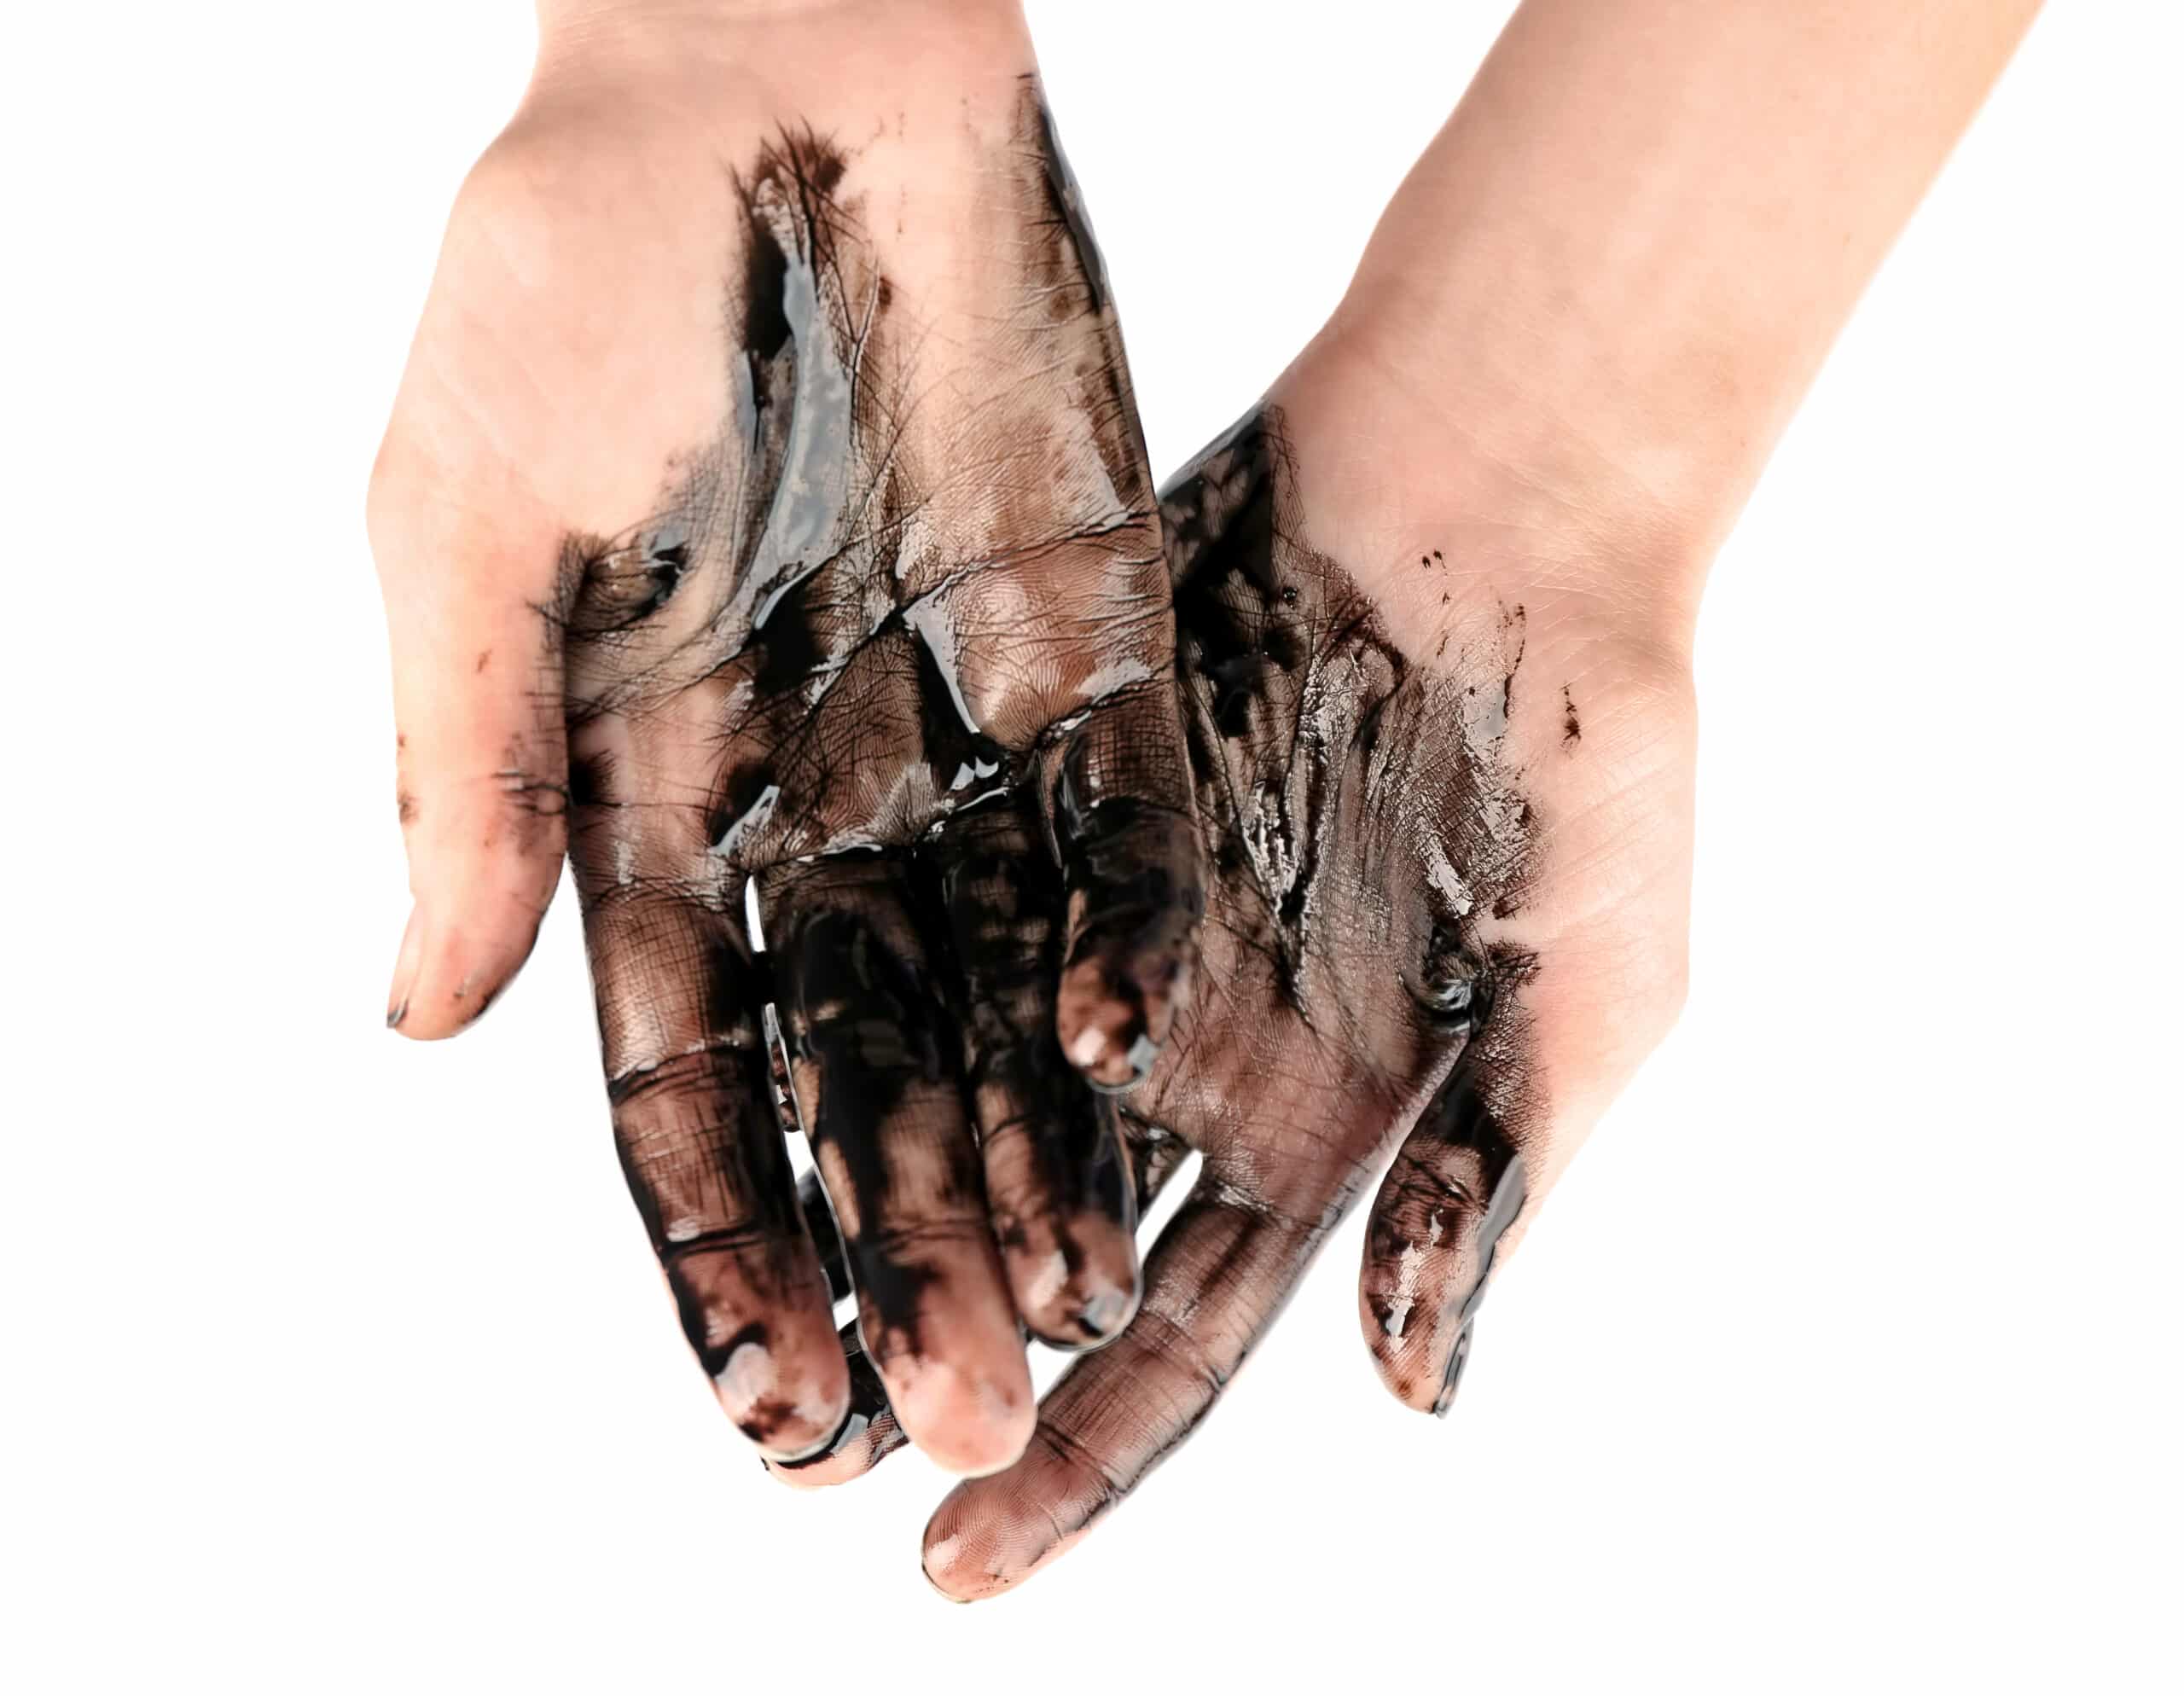 Human hands with oil on white background